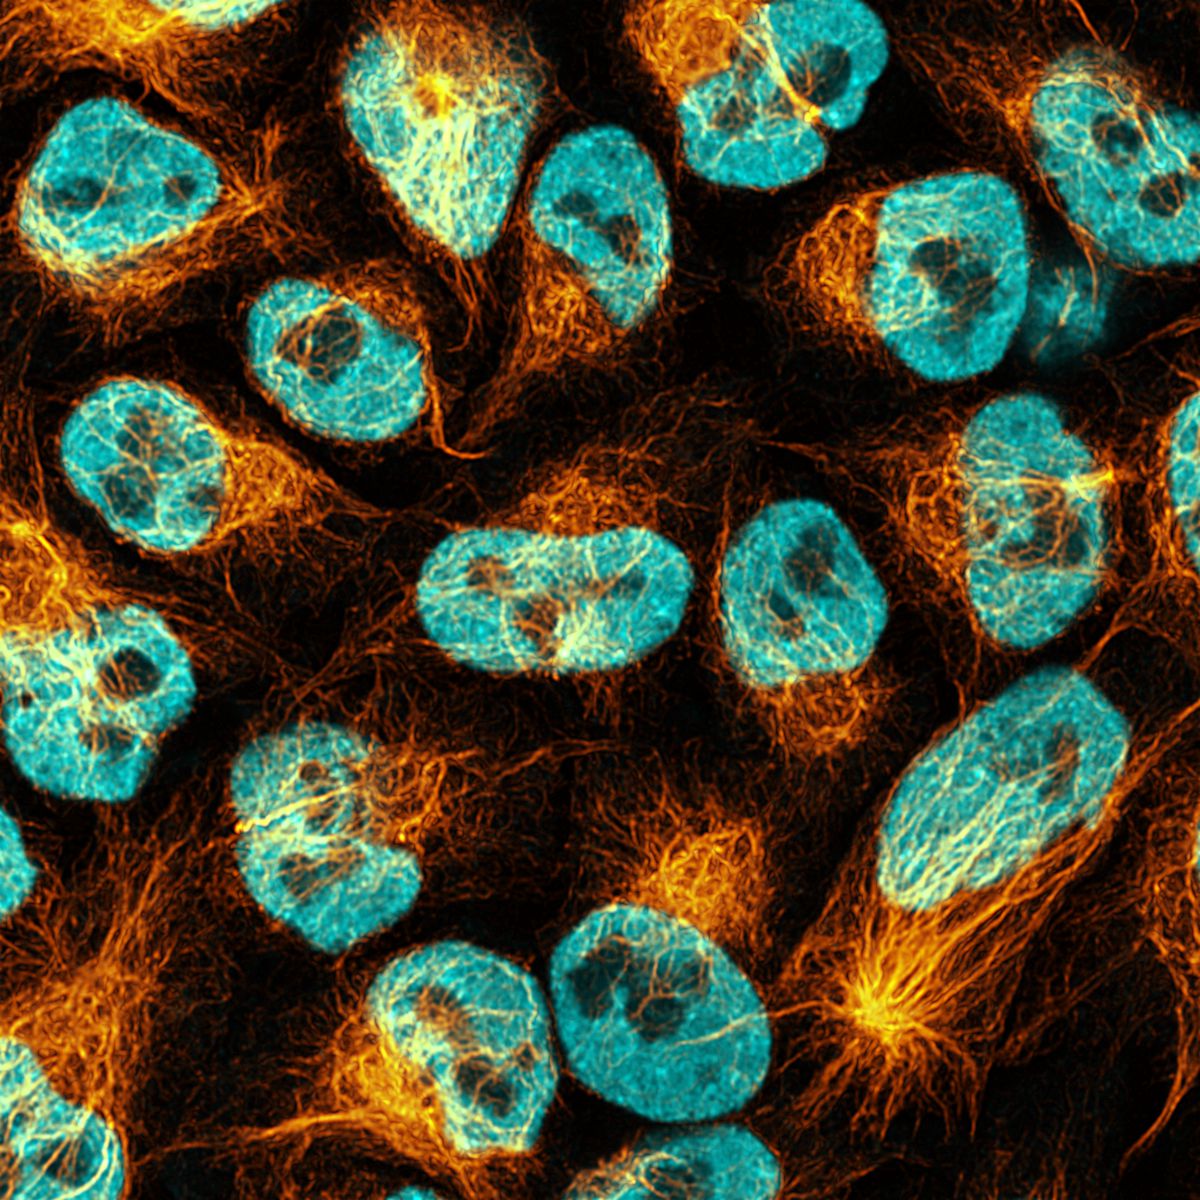 Immunofluorescence of HeLa: PFA-fixed HeLa cells were stained with anti-Vimentin labeled with FlexAble CoraLite® Plus 550 Kit (KFA022, yellow) and anti-hnRNP labeled with FlexAble CoraLite® Plus 650 Kit (KFA023, cyan).​ Confocal images were acquired with a 100x oil objective and post-processed. Images were recorded at the Core Facility Bioimaging at the Biomedical Center, LMU Munich.